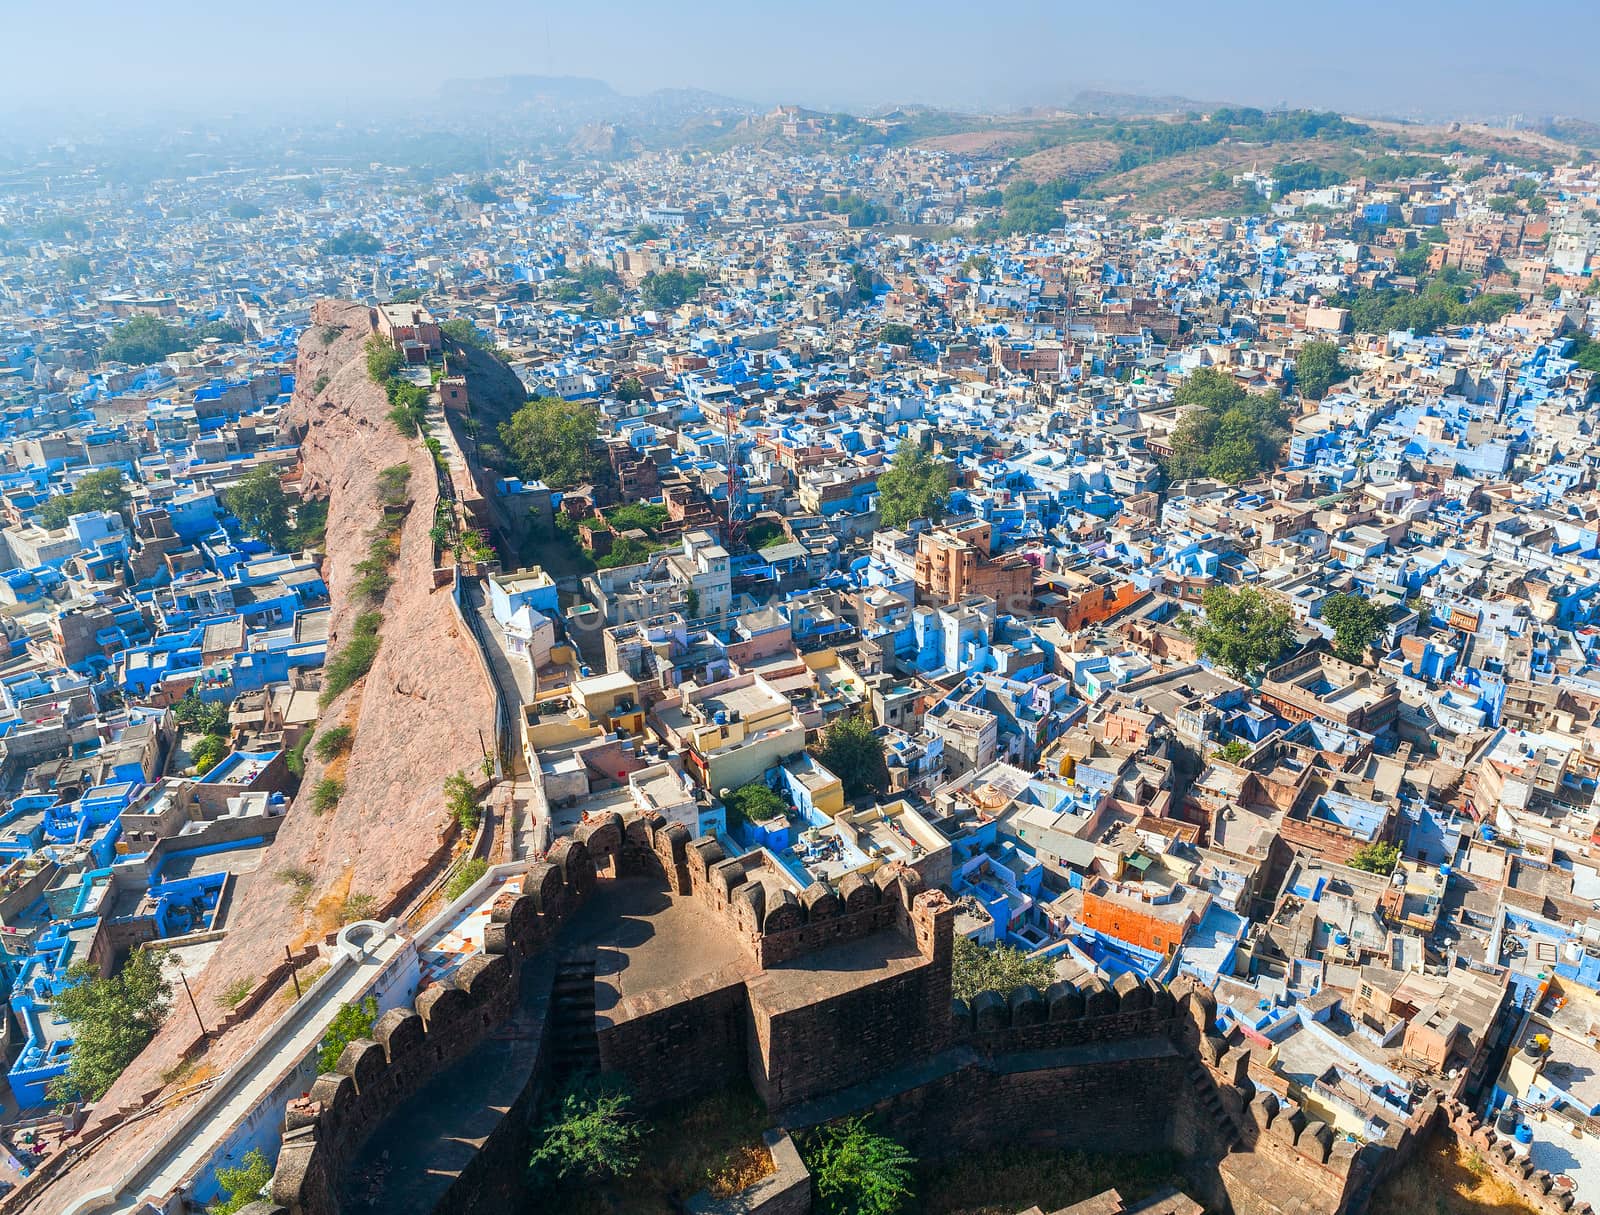  Jodhpur, the Blue City. View from Mehrangarh Fort. Rajasthan, India, Asia
